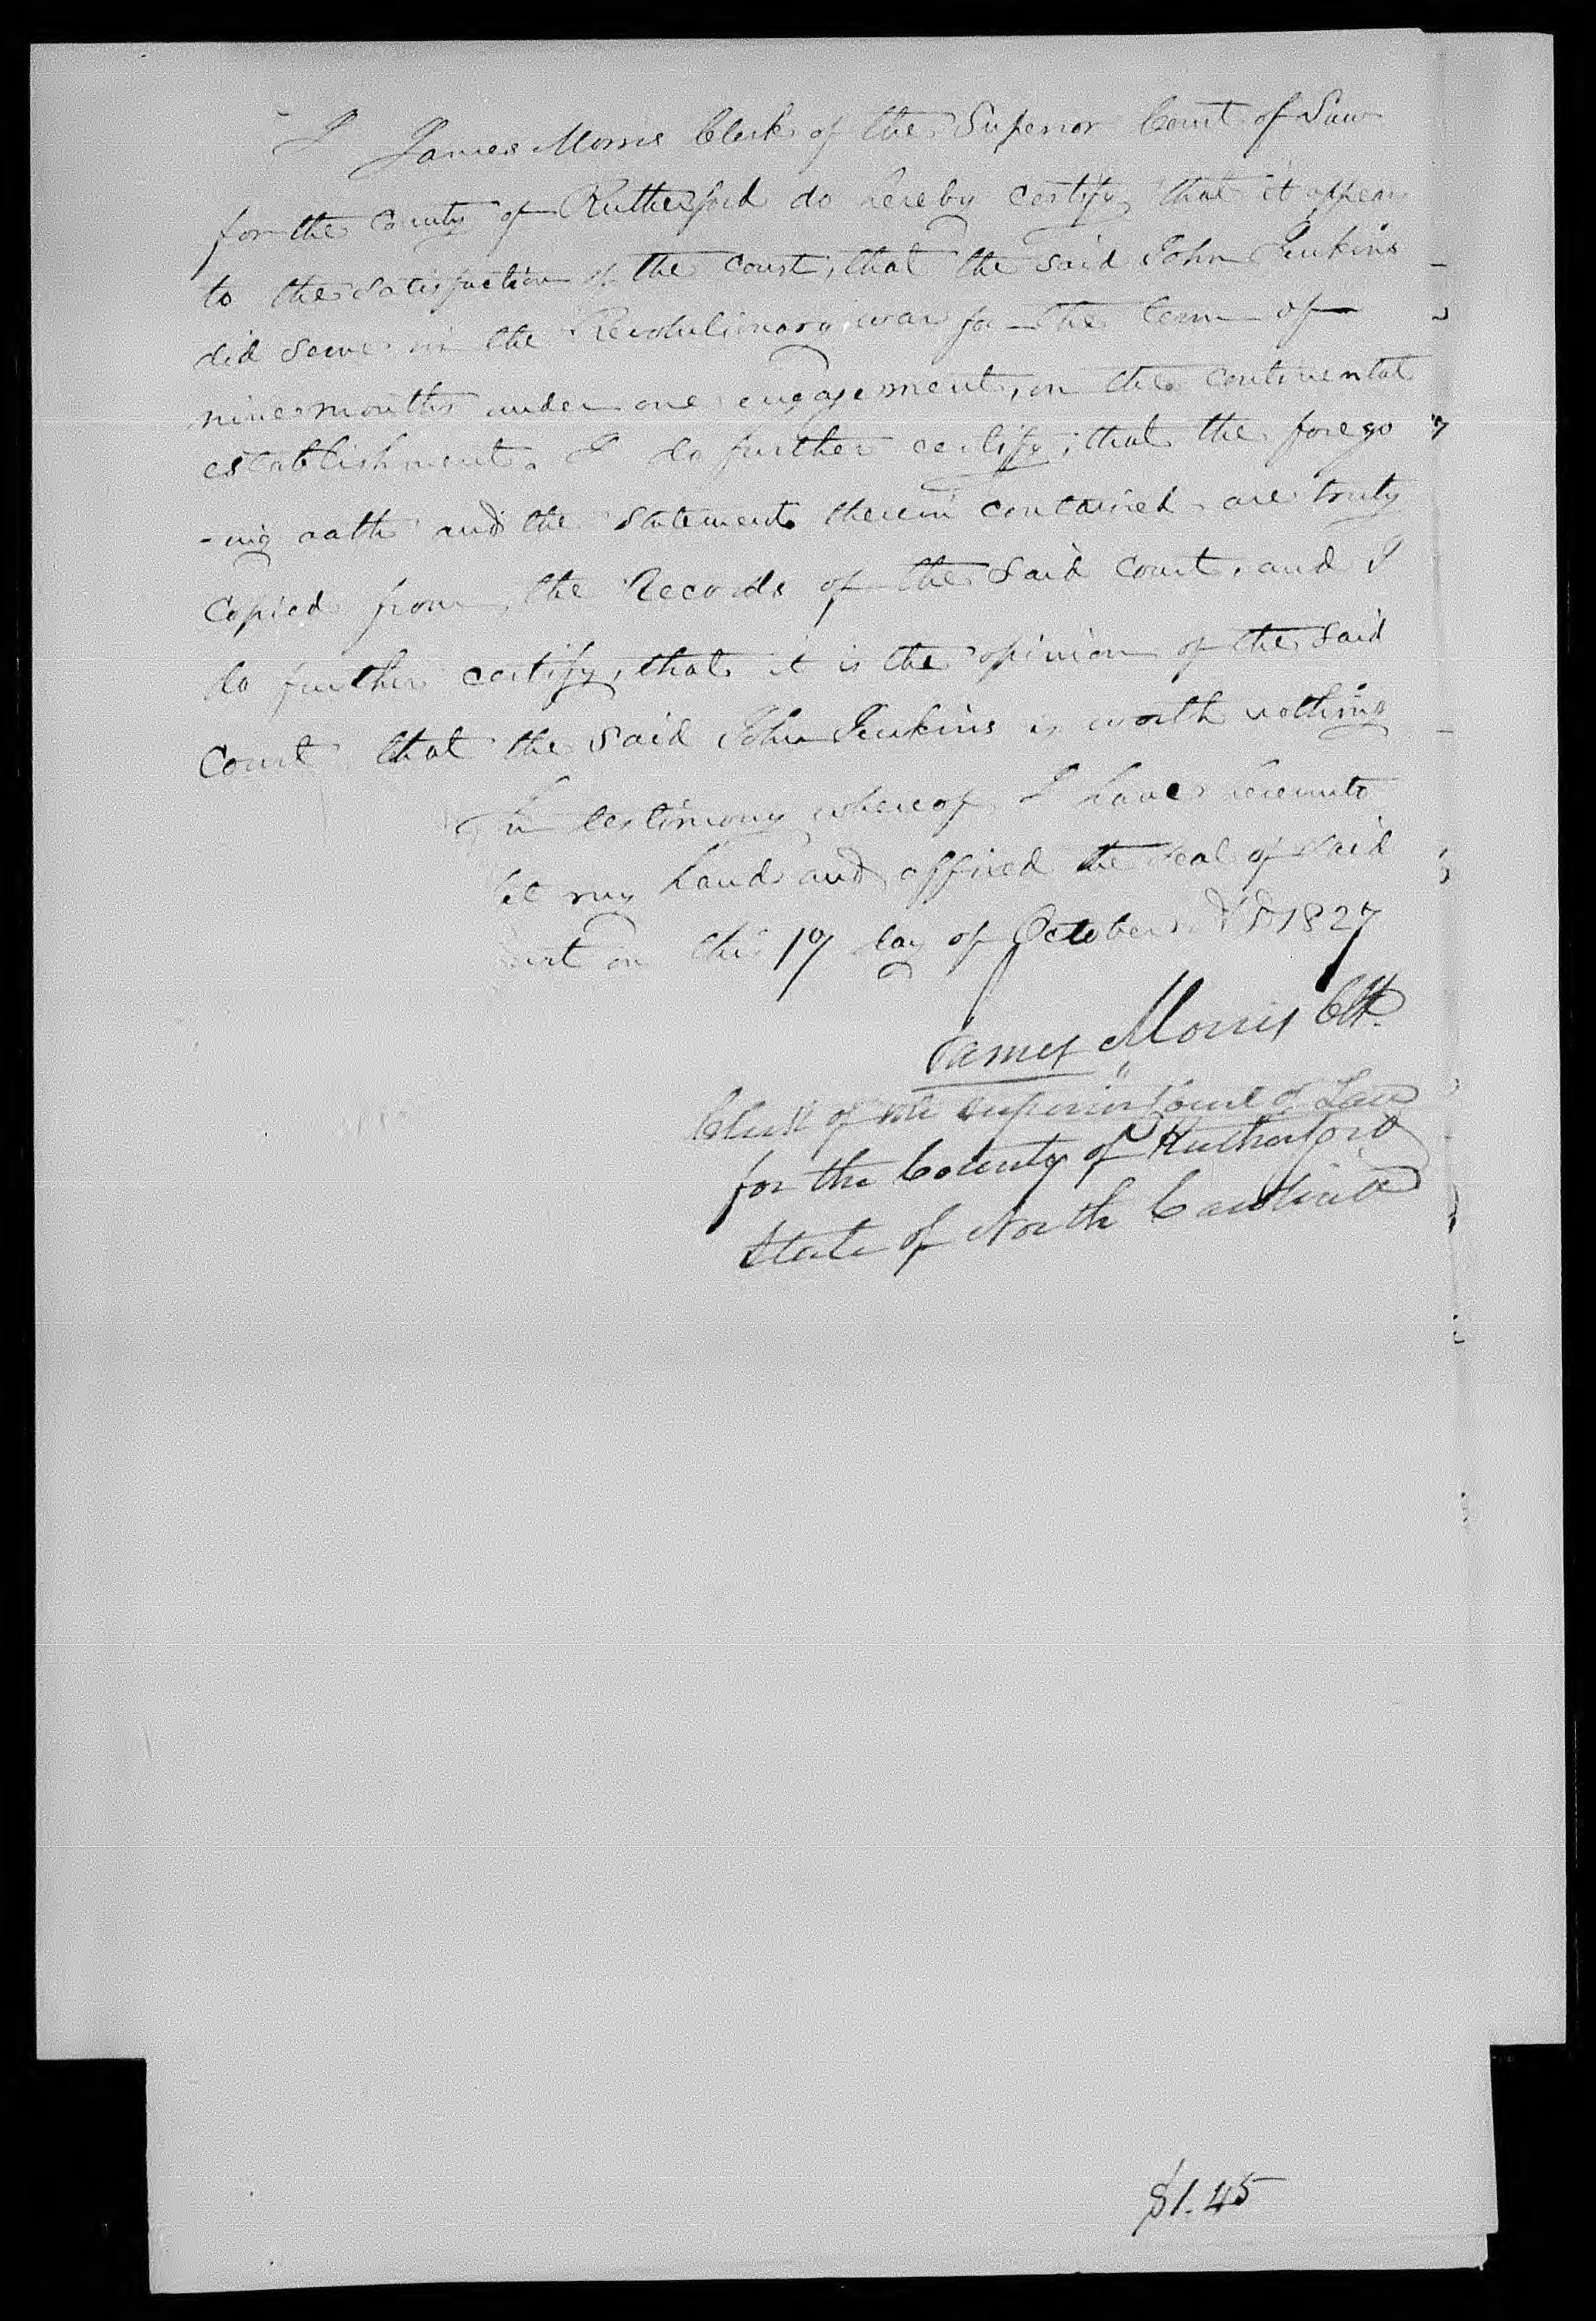 Application for a Veteran's Pension from John Jenkins, 18 October 1827, page 3